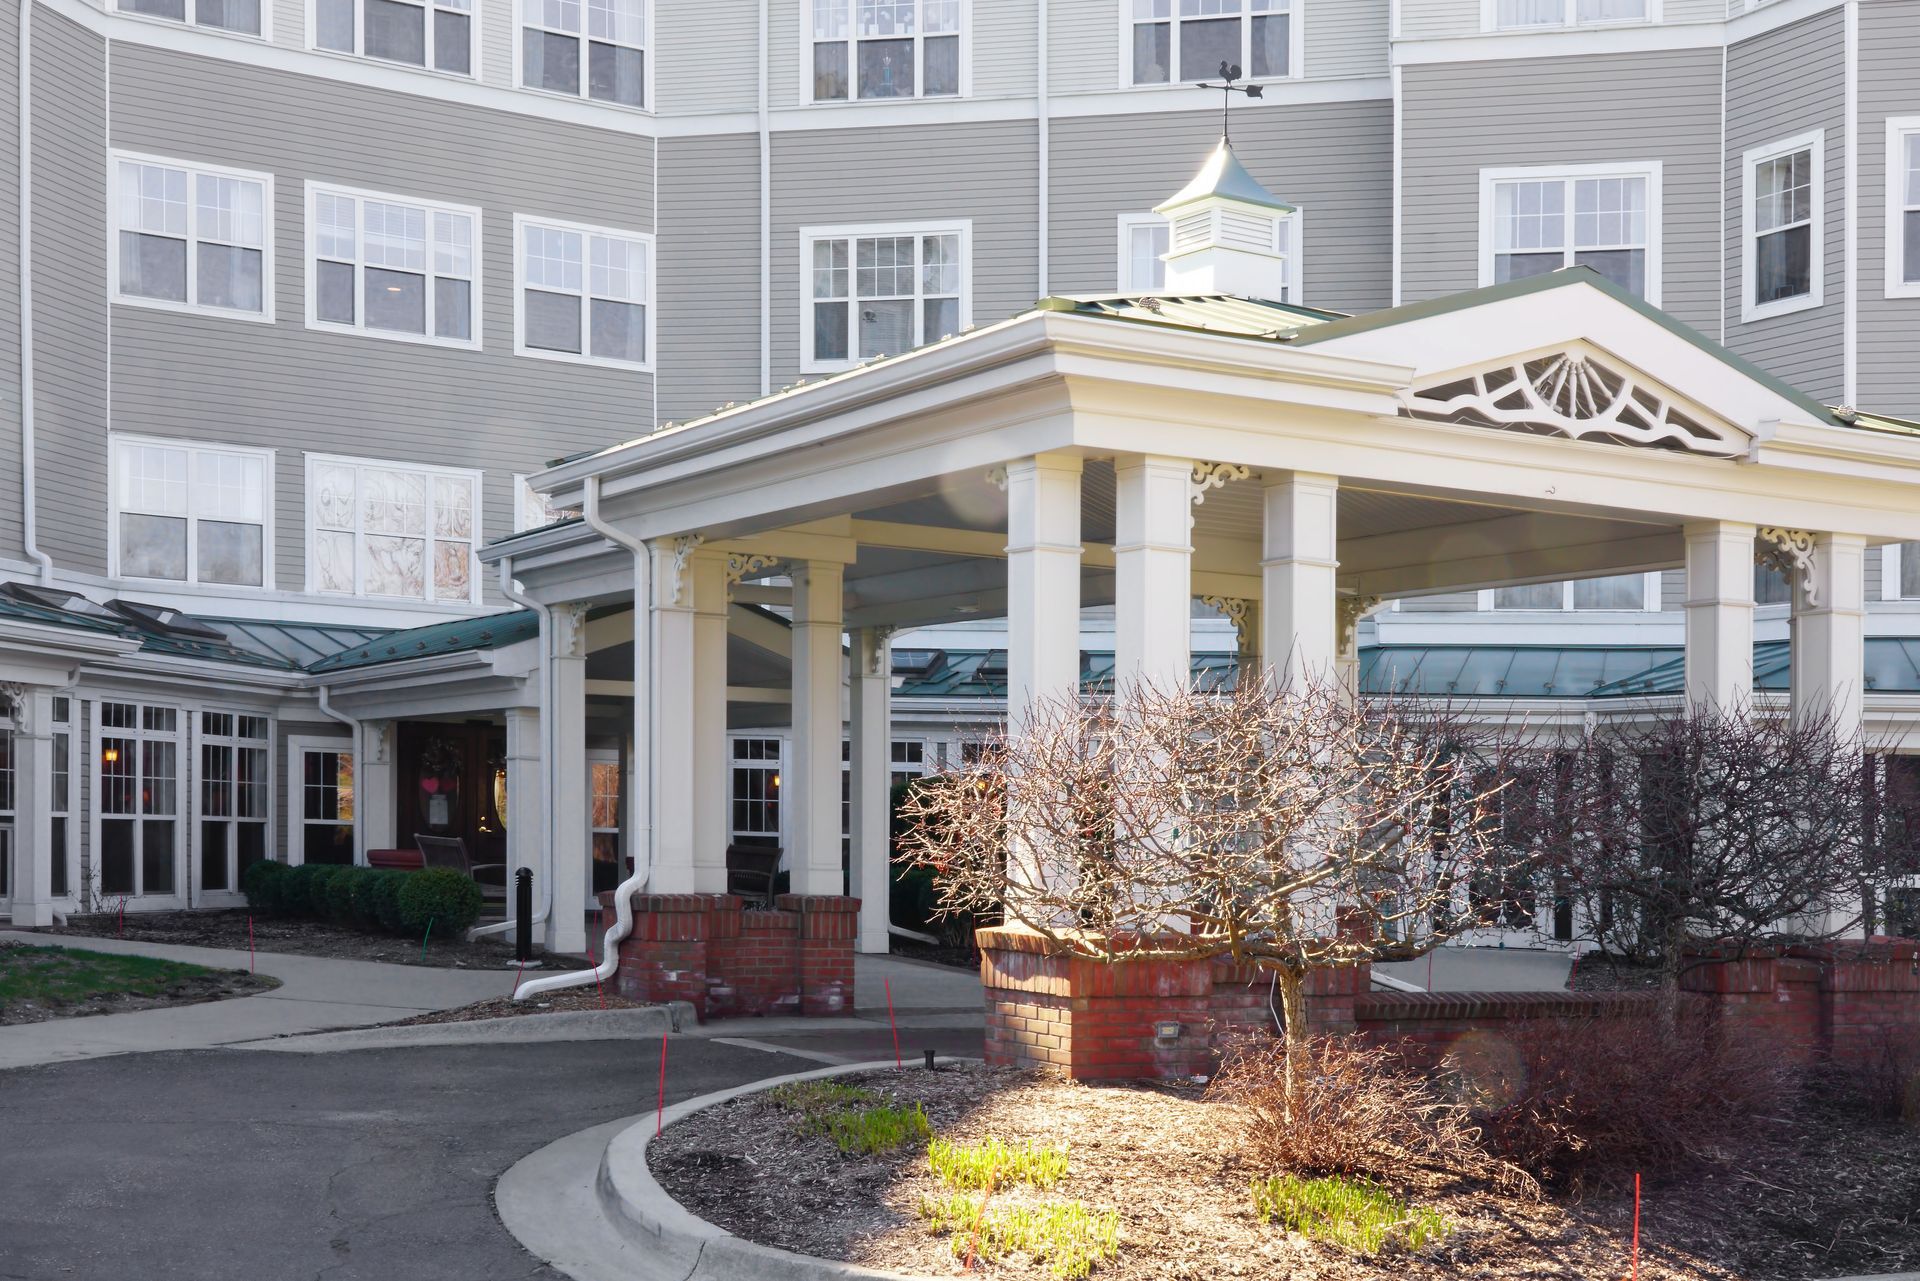 assisted living facility covered in snow and in need of snow removal